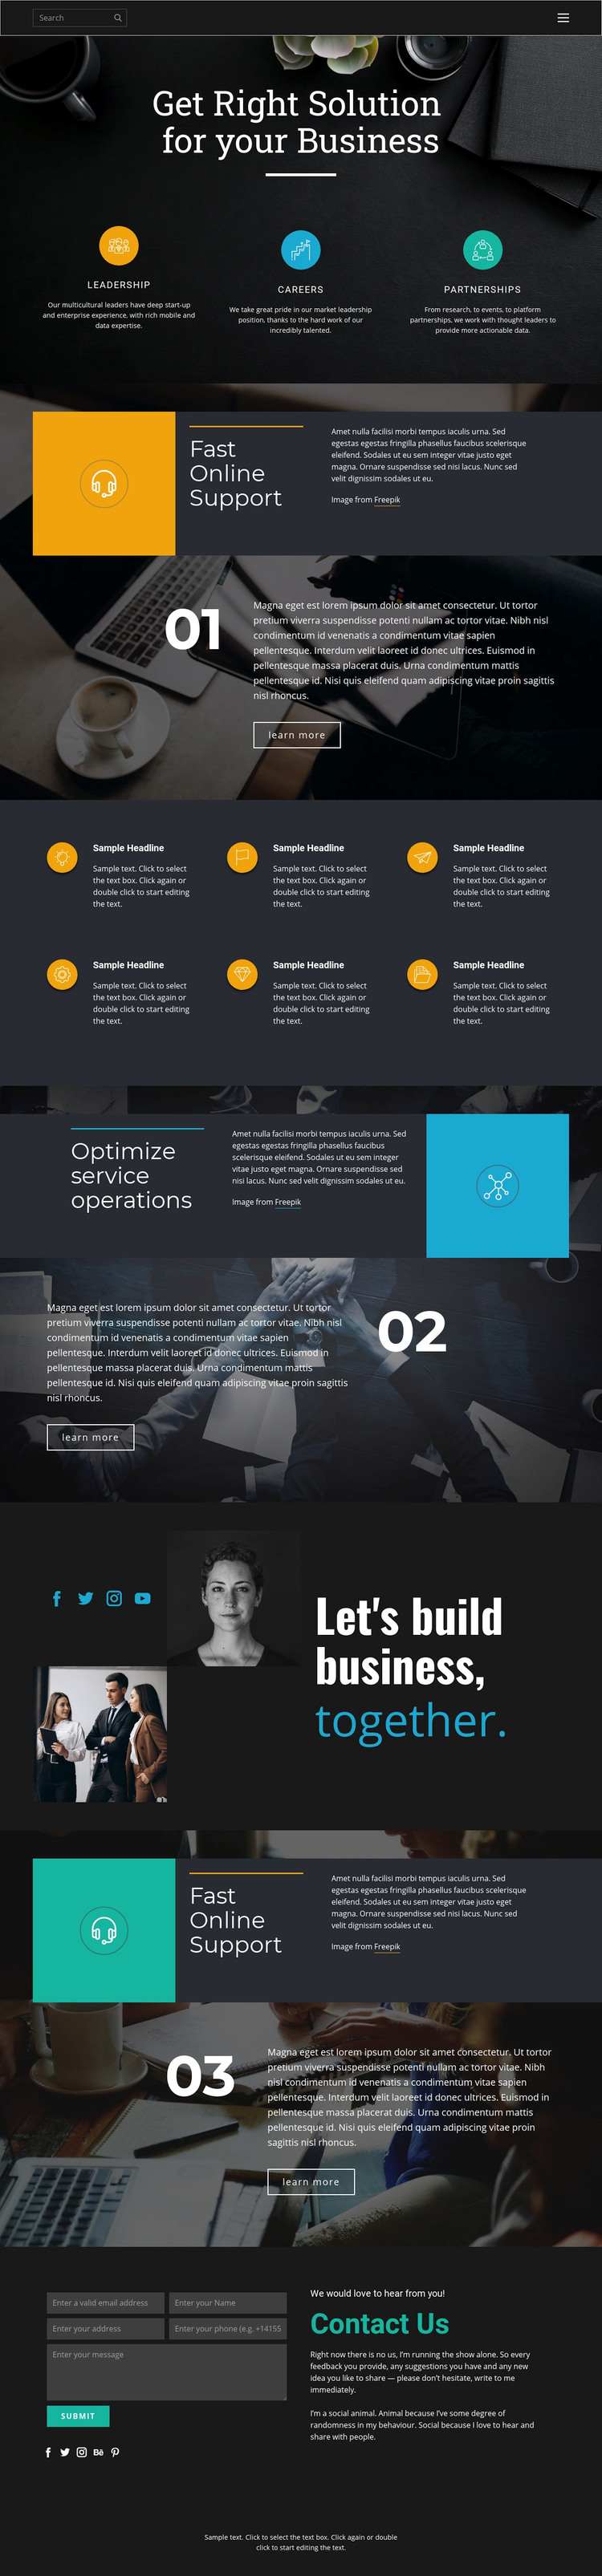 Right solutions for business Elementor Template Alternative